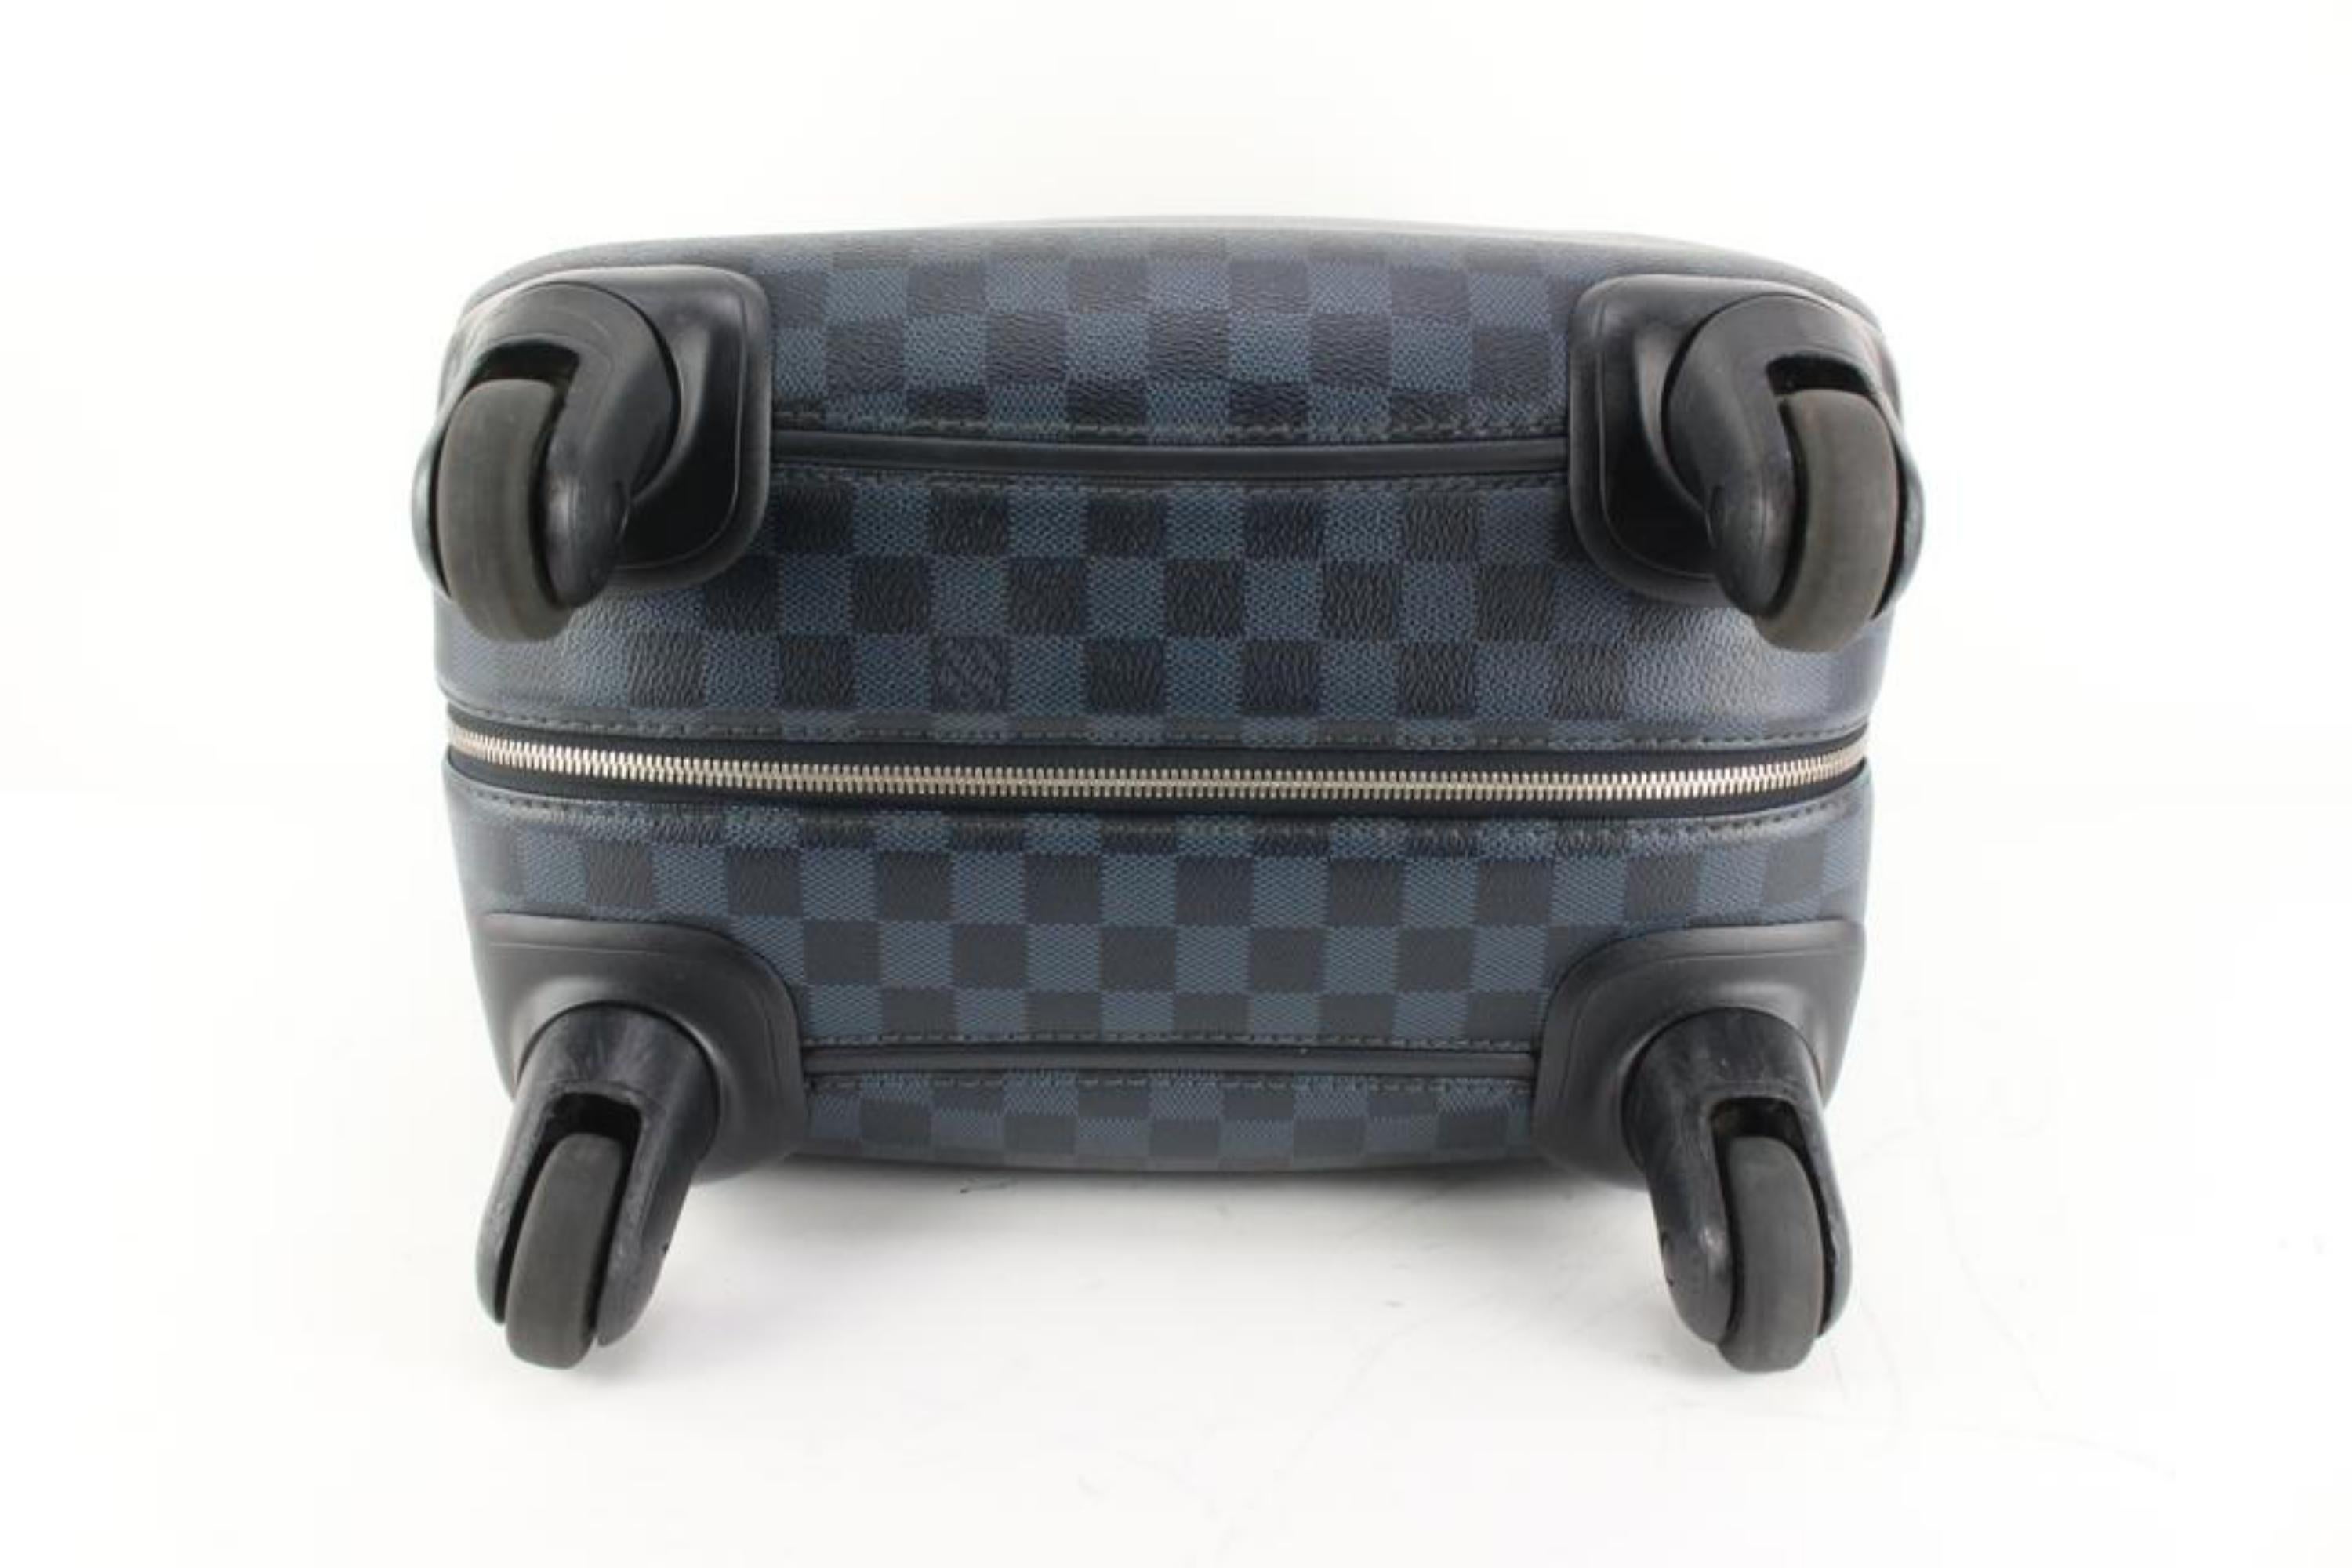 louis vuitton rolling luggage